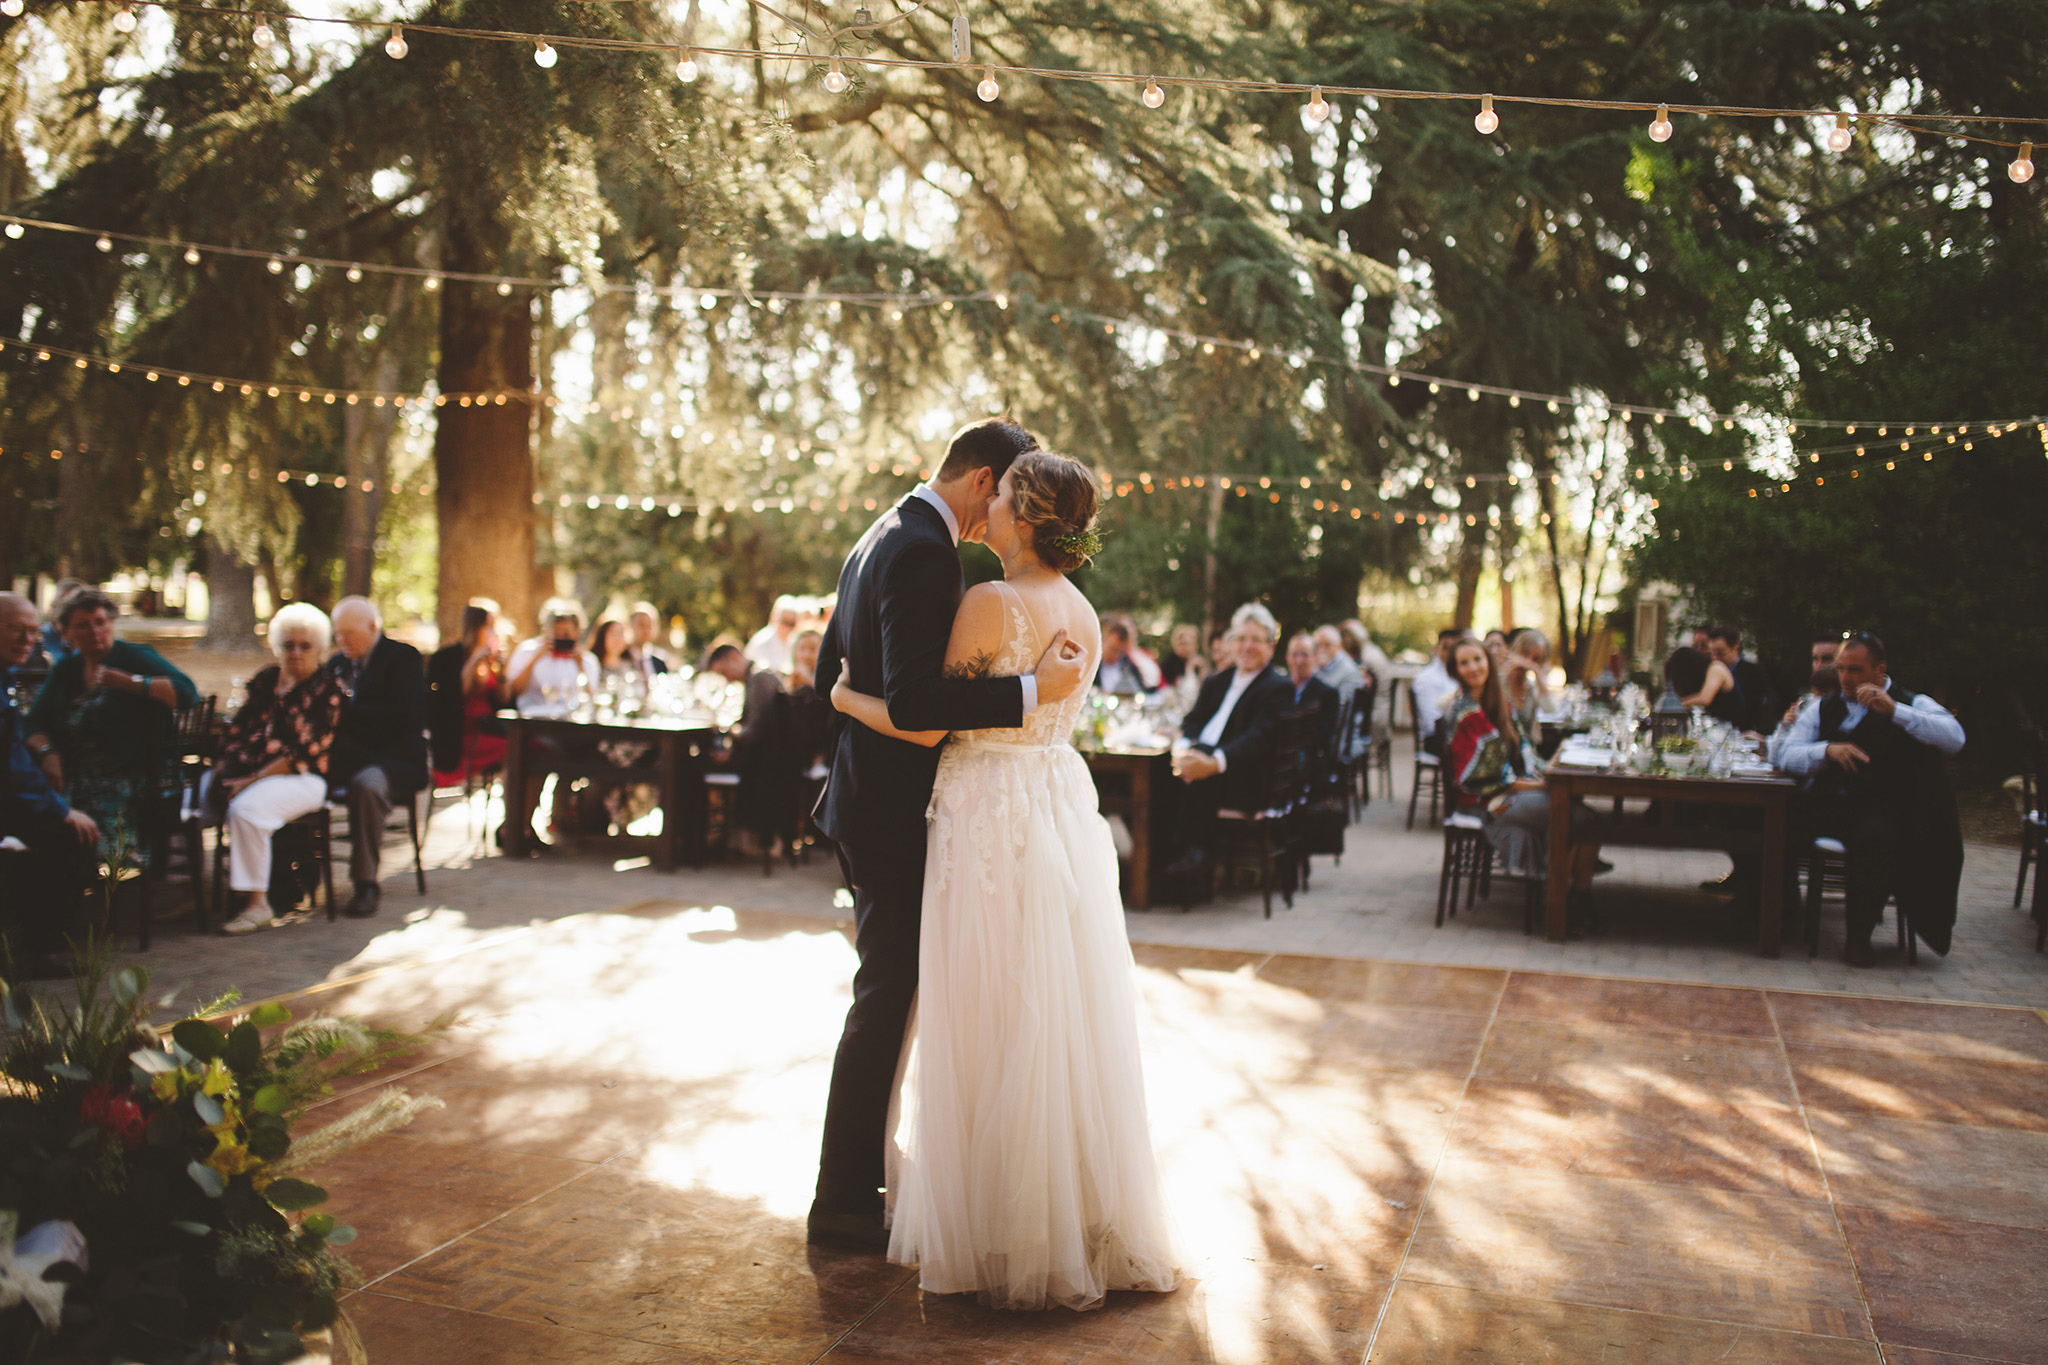 BoHo Highland Springs wedding pictures in California